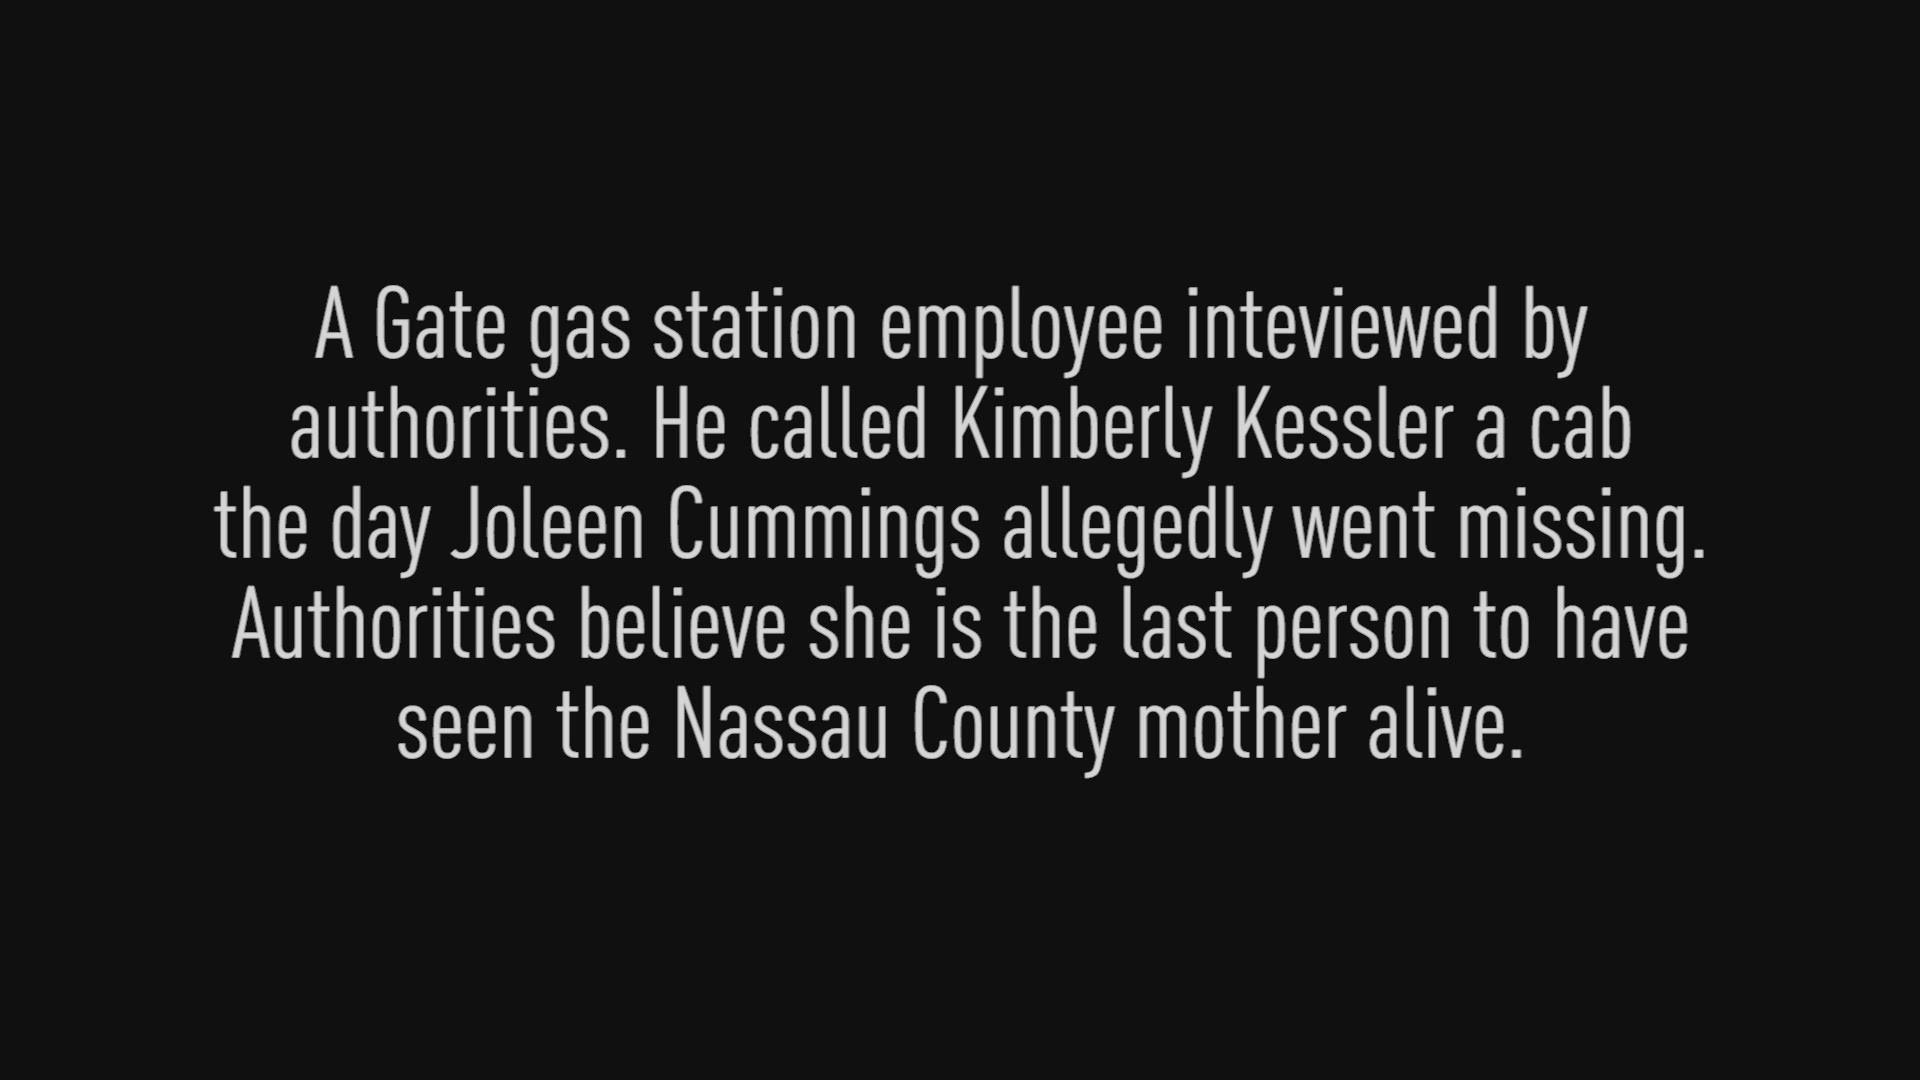 RAW VIDEO ' Gas station employee called cab for Kimberly Kessler day Cummings disappeared